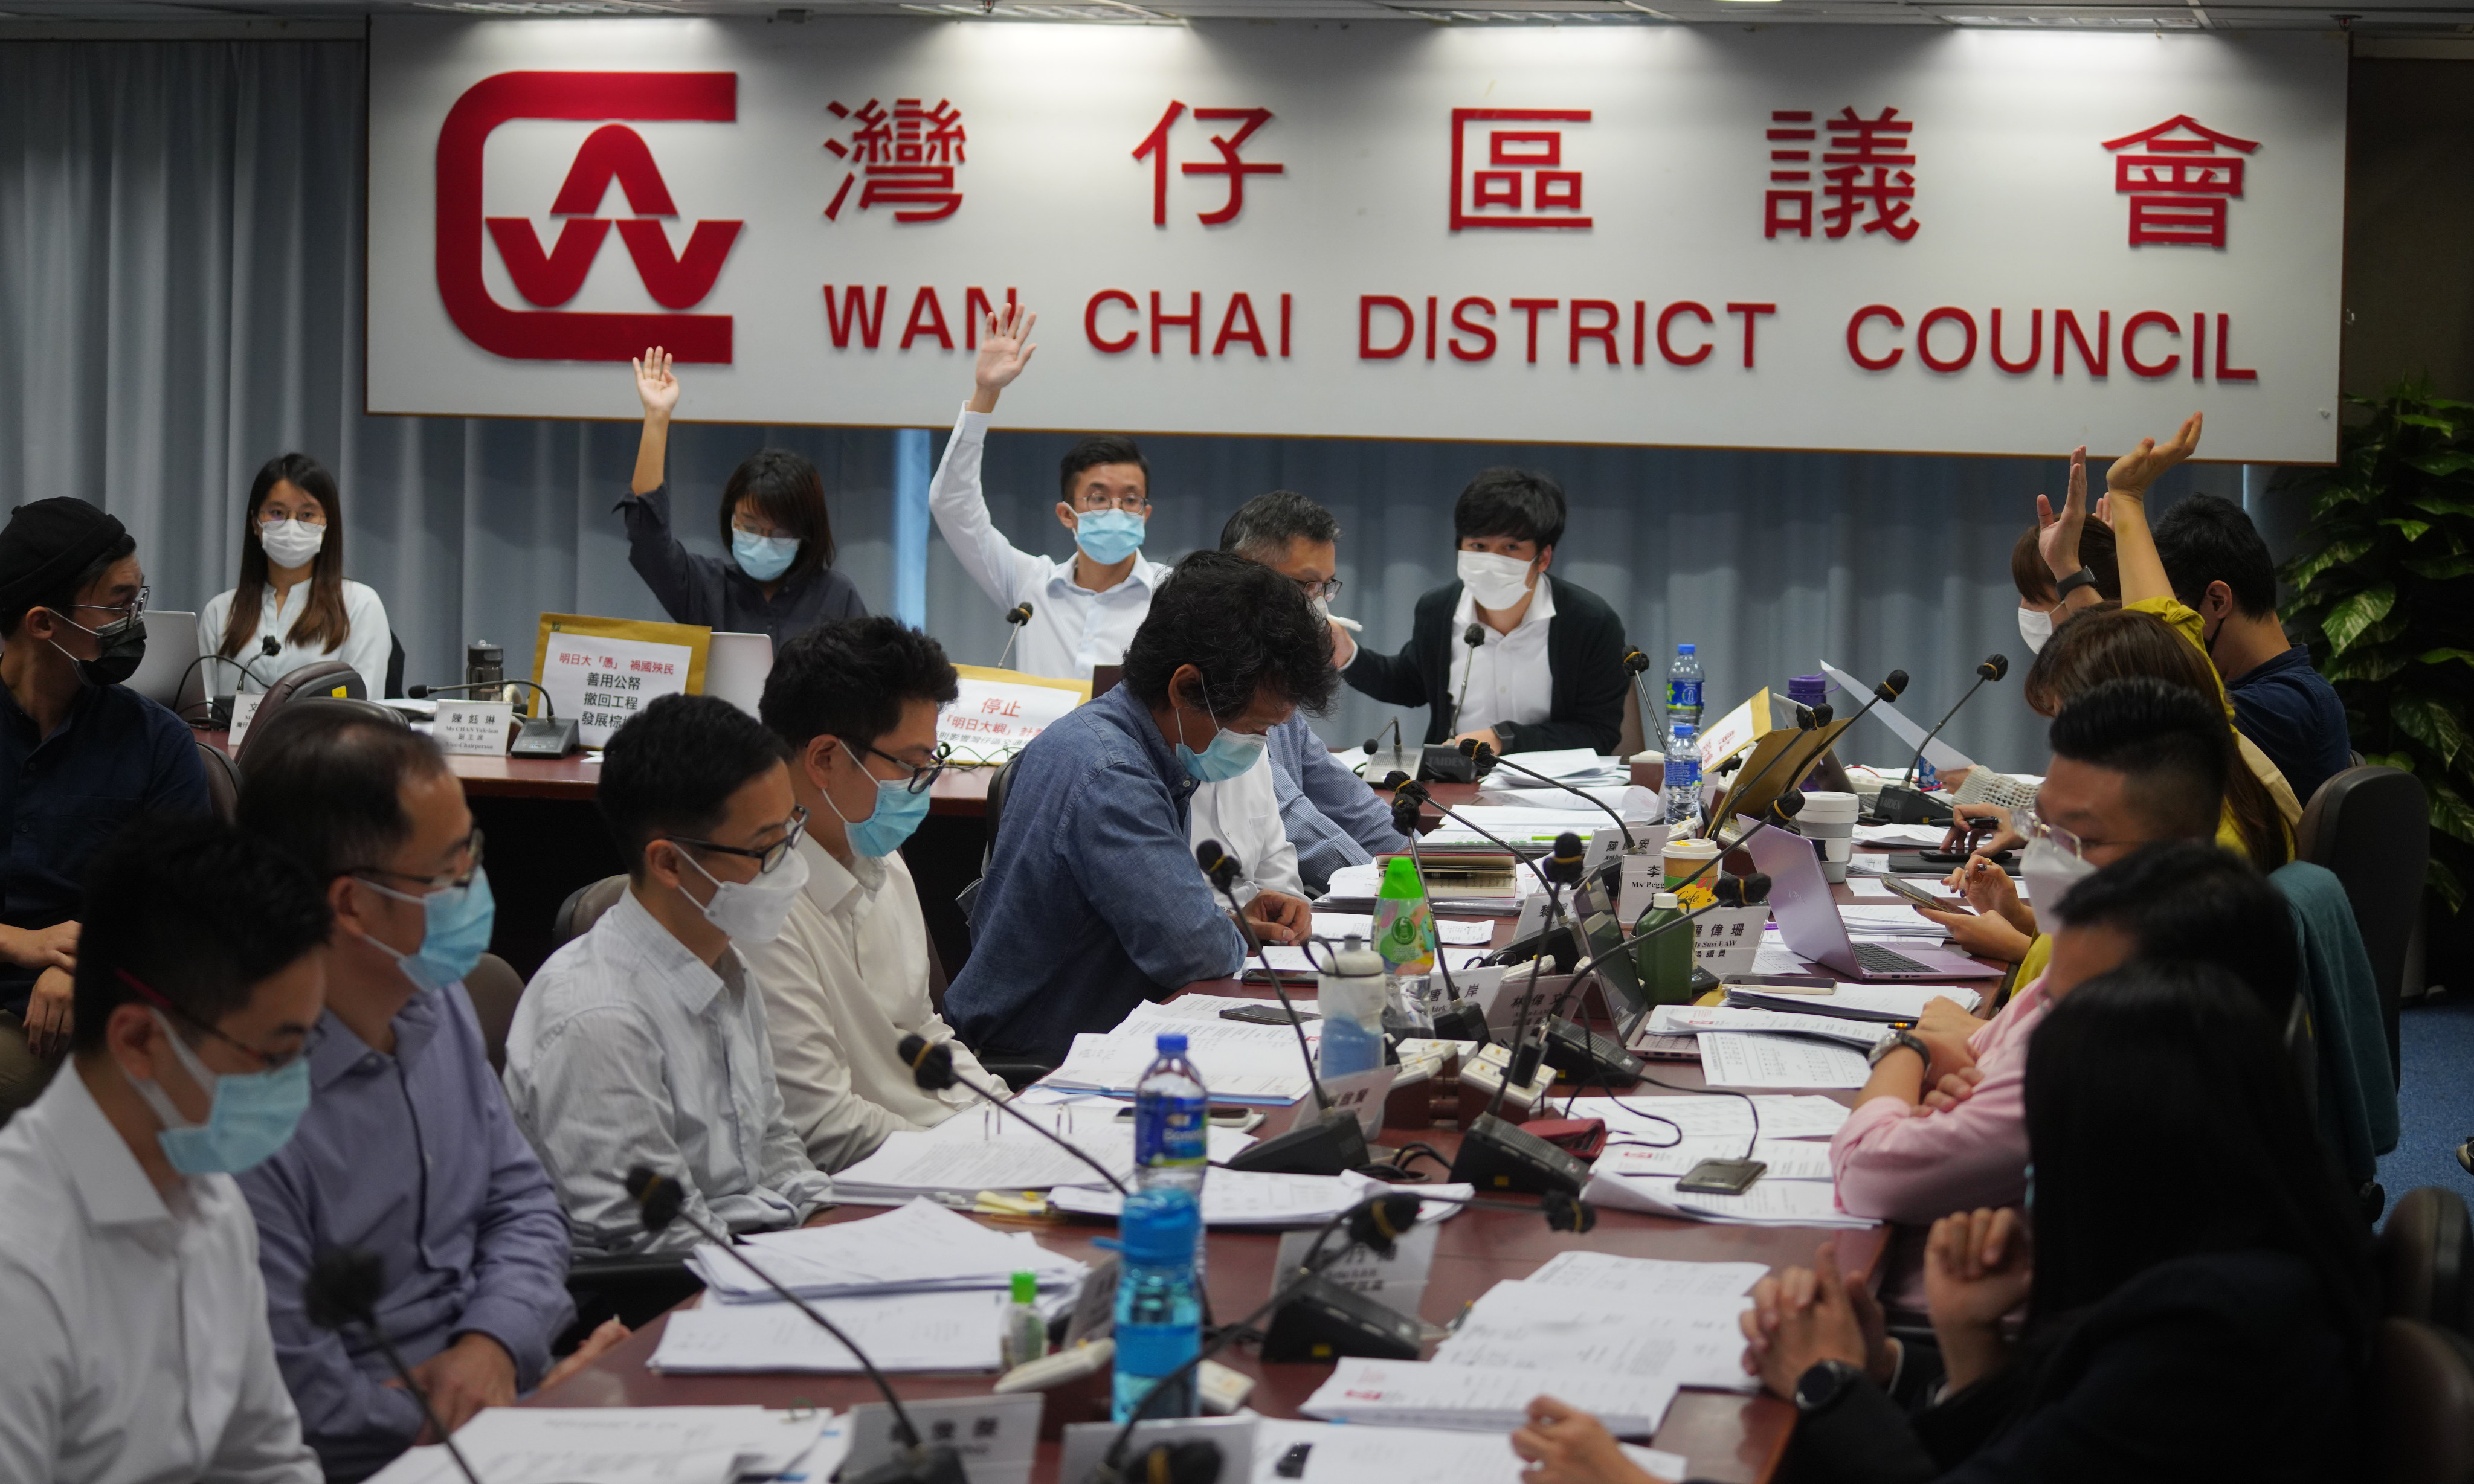 A Wan Chai district council meeting in 2020. The government claims some councils have lost sight of their mission of serving their local communities. Photo: Winson Wong